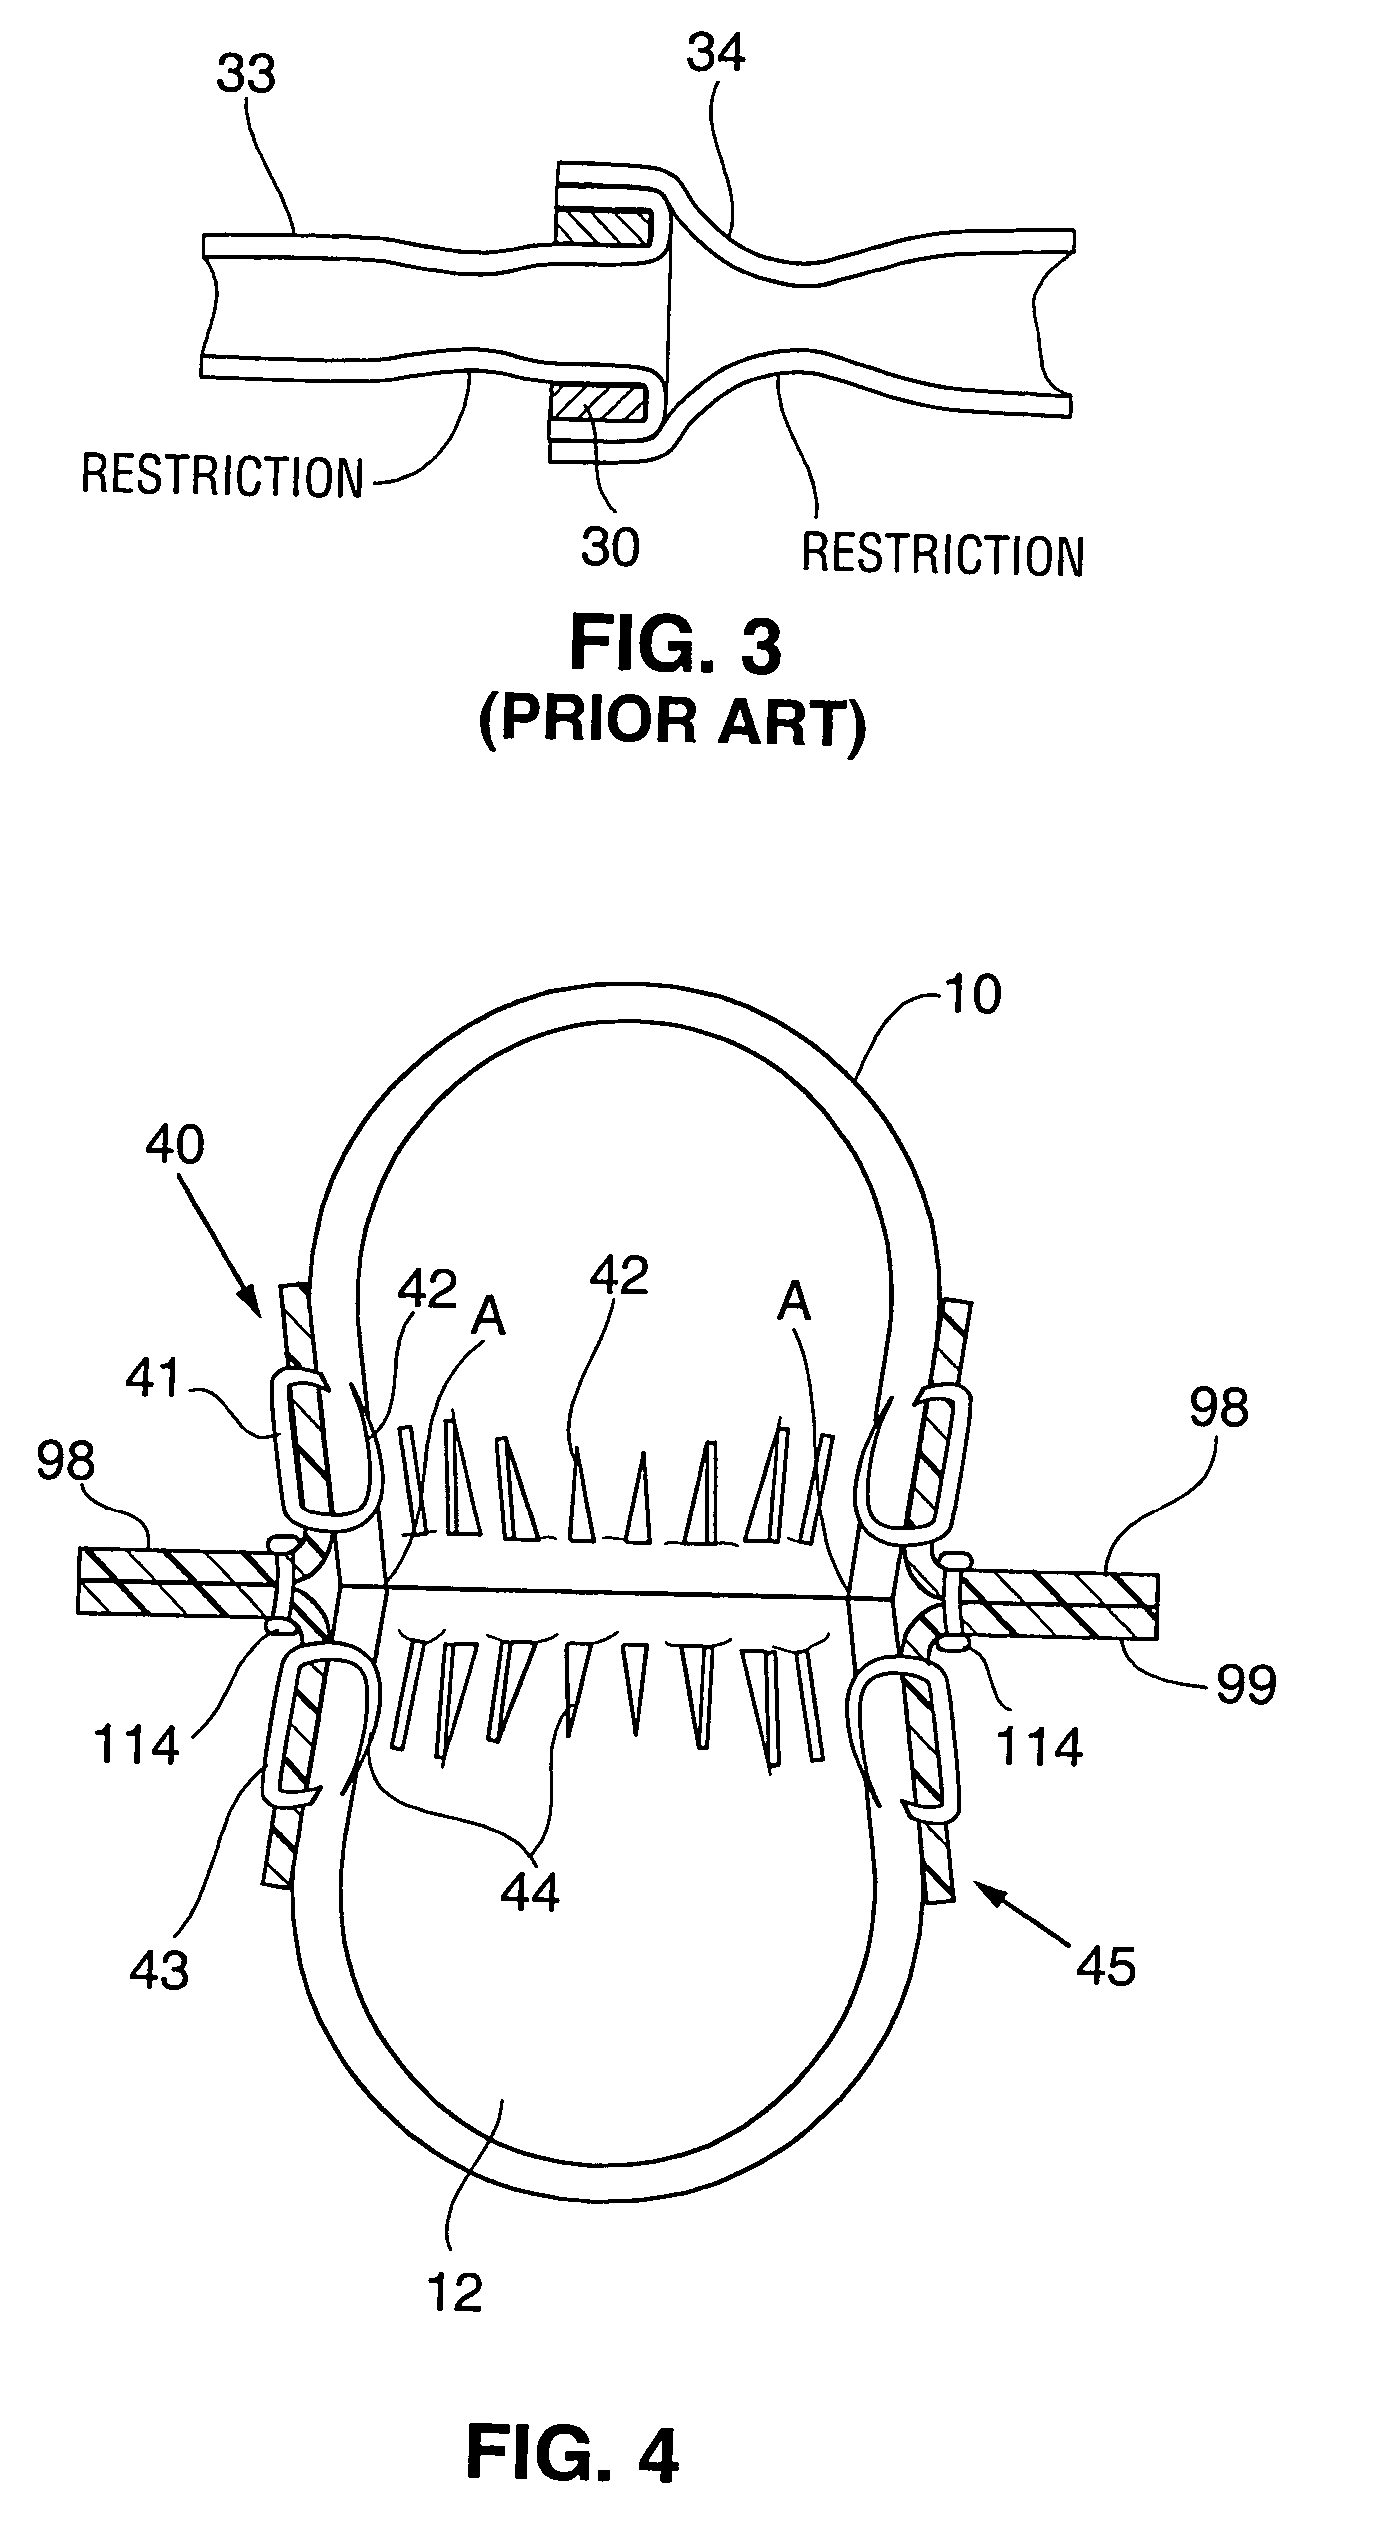 Method and apparatus for performing anastomosis with eversion of tissue edges and joining of exposed intima of the everted tissue